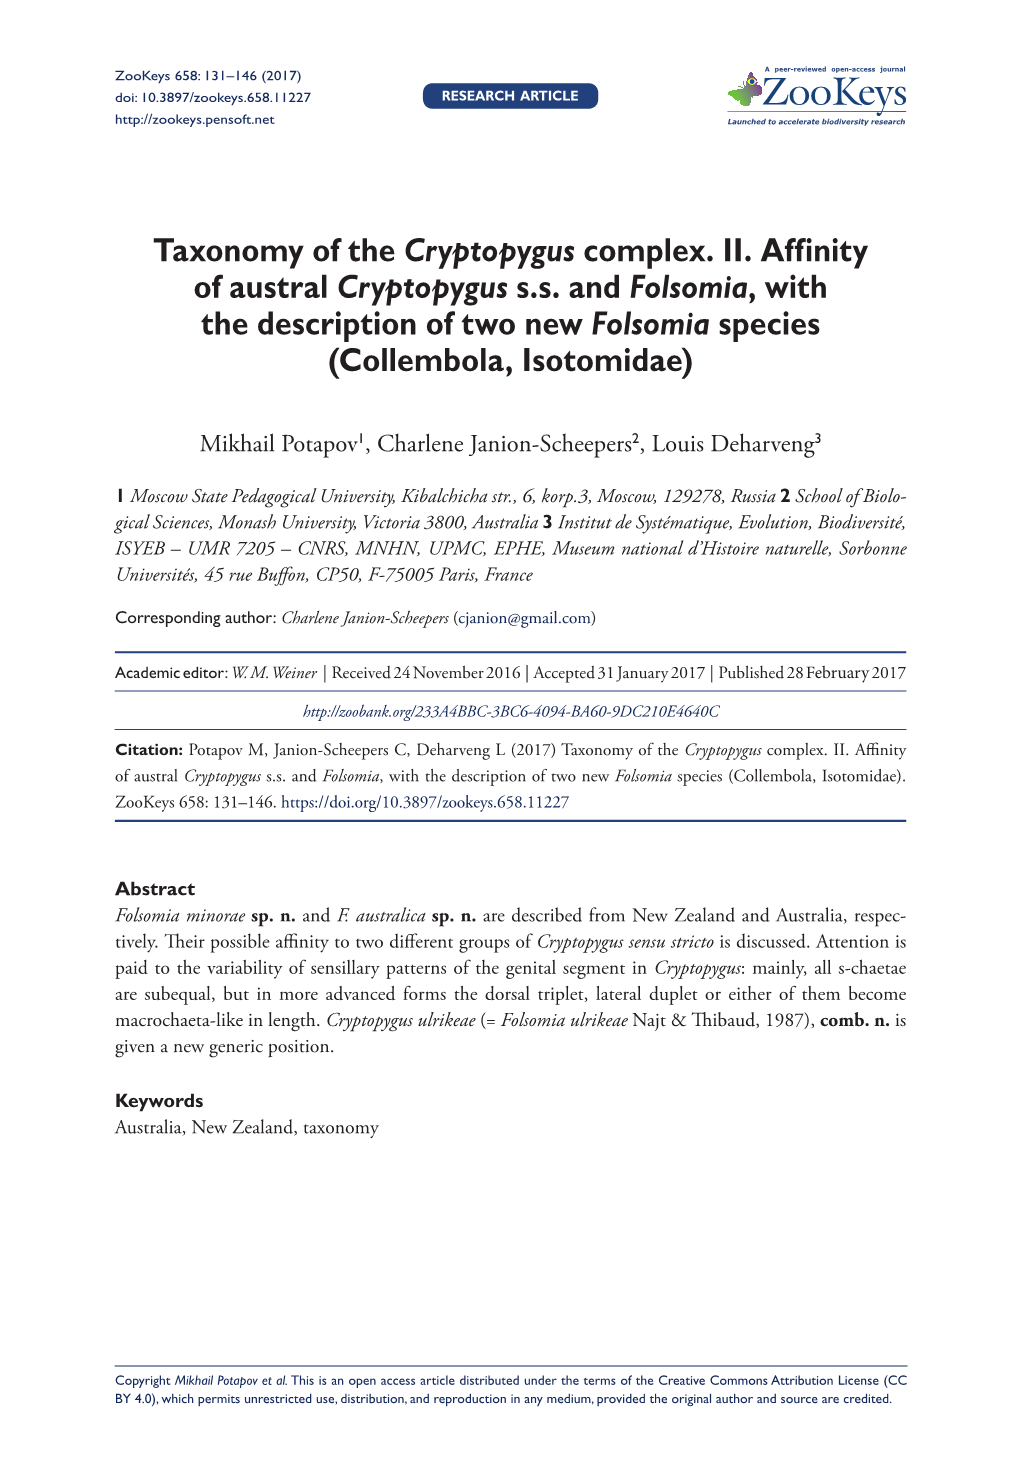 Taxonomy of the Cryptopygus Complex. II. Affinity of Austral Cryptopygus S.S